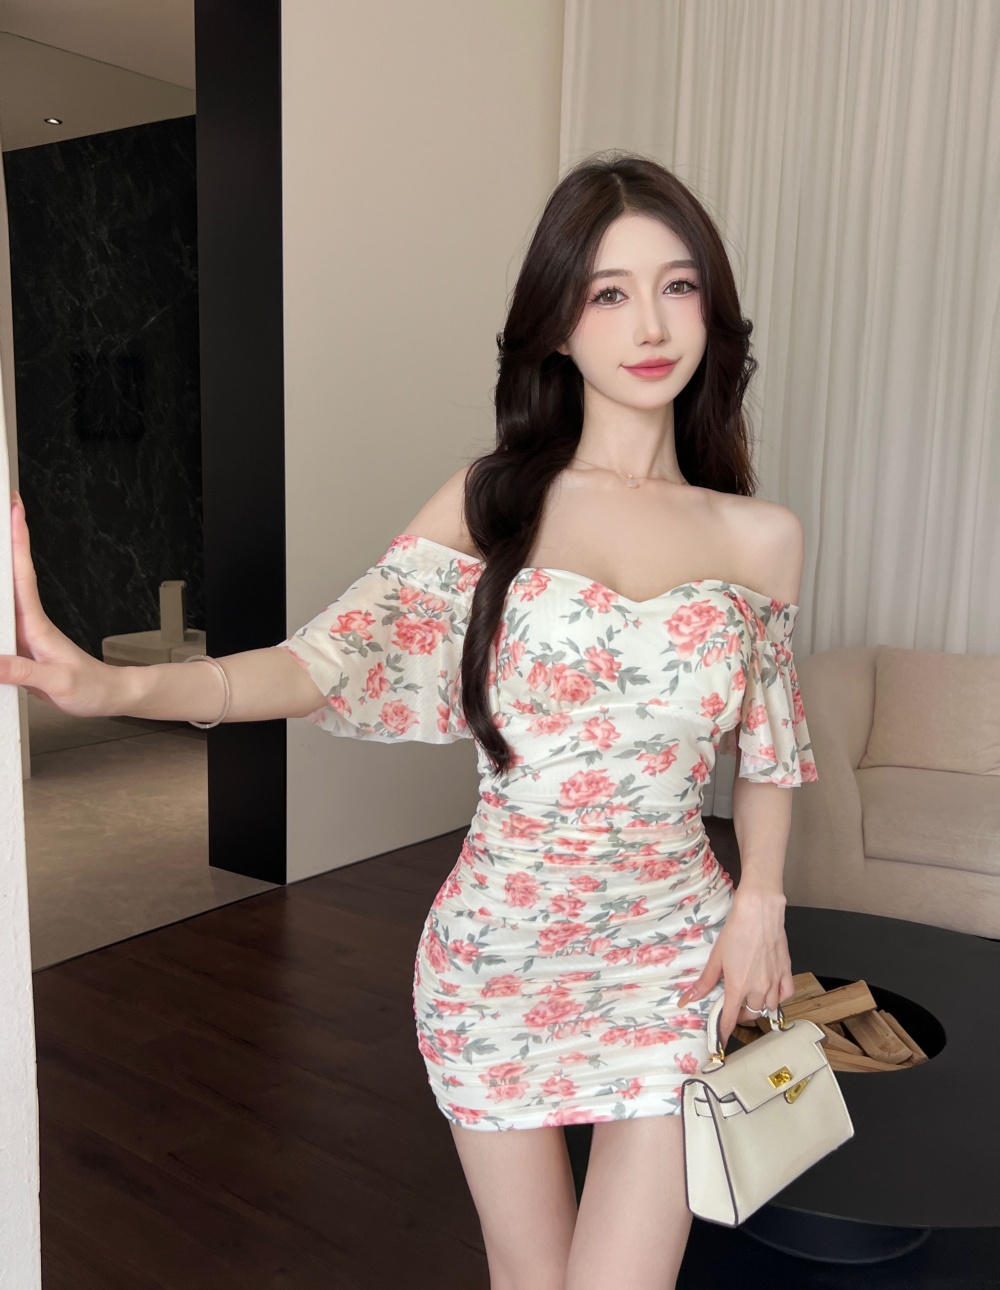 Low-cut fashion colors package hip slim sexy dress